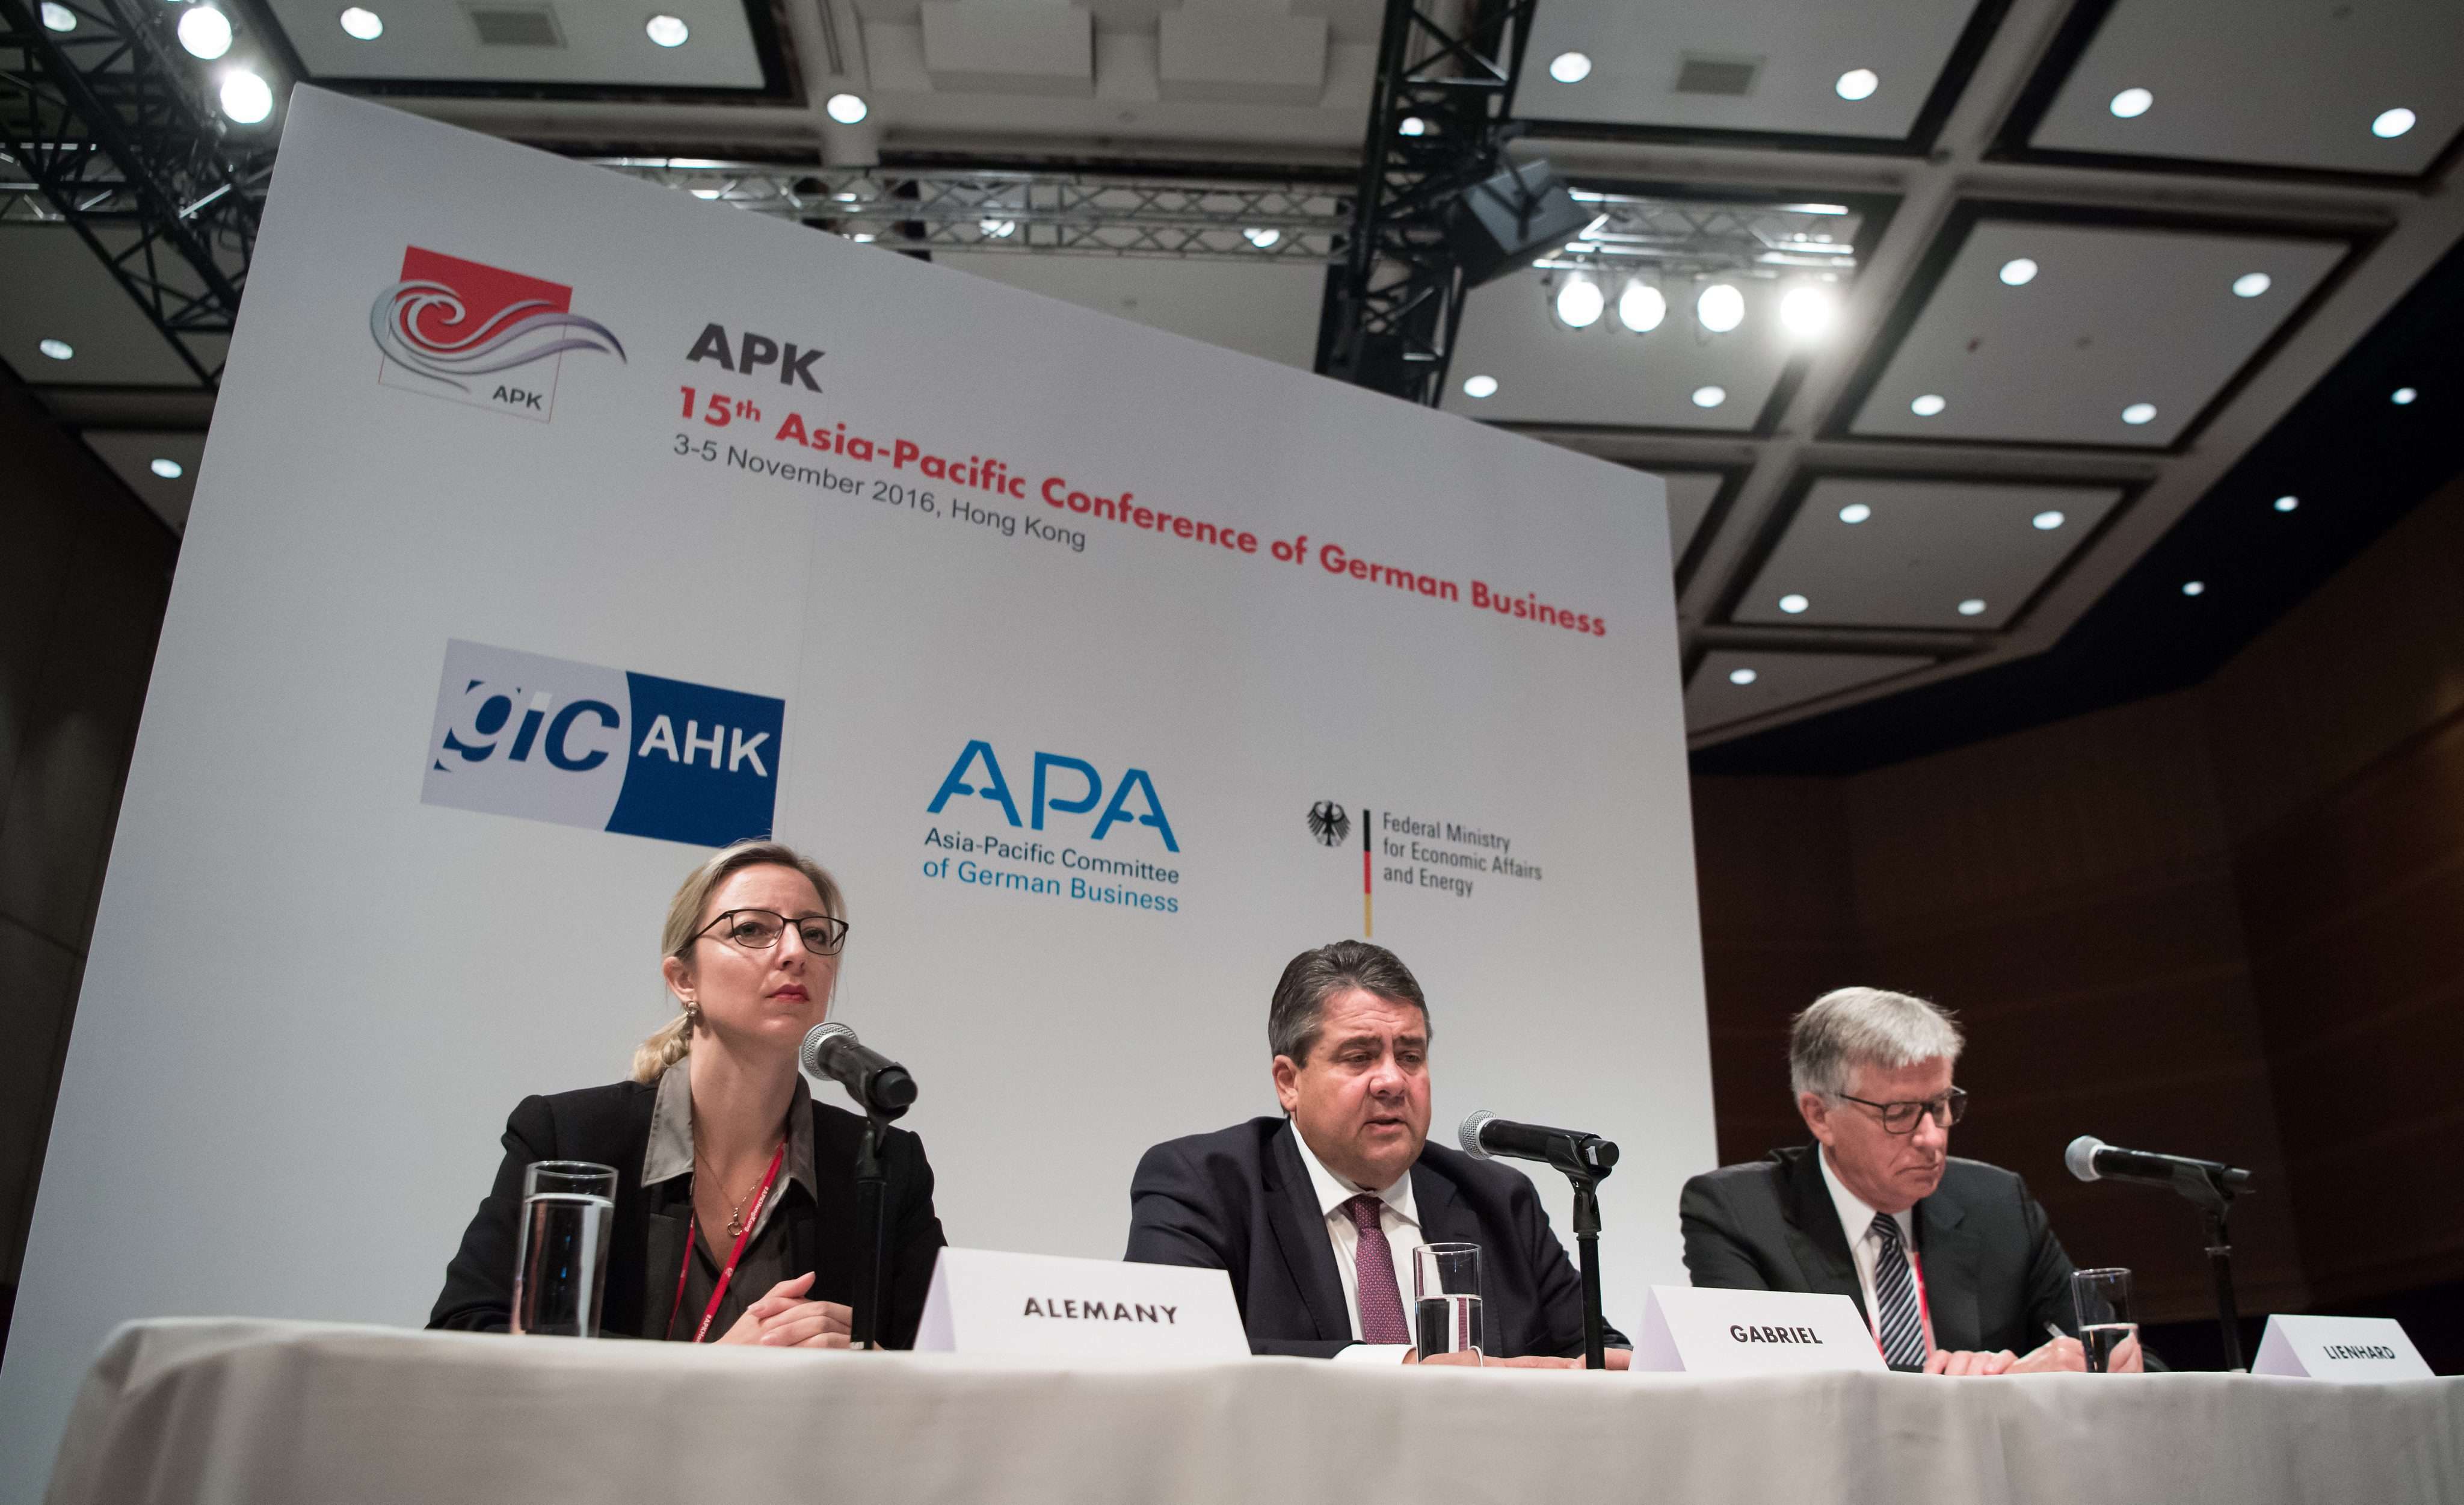 Sigmar Gabriel (centre), the German economic affairs minister, is flanked by ministry spokesperson Tanja Alemany Sanchez de Leon and Hubert Lienhard, chairman of the Asia-Pacific Commission and CEO of German multinational Voith, at a joint news conference on the occasion of the 15th Asia-Pacific Conference of German Business in Hong Kong on November 4. Photo: EPA